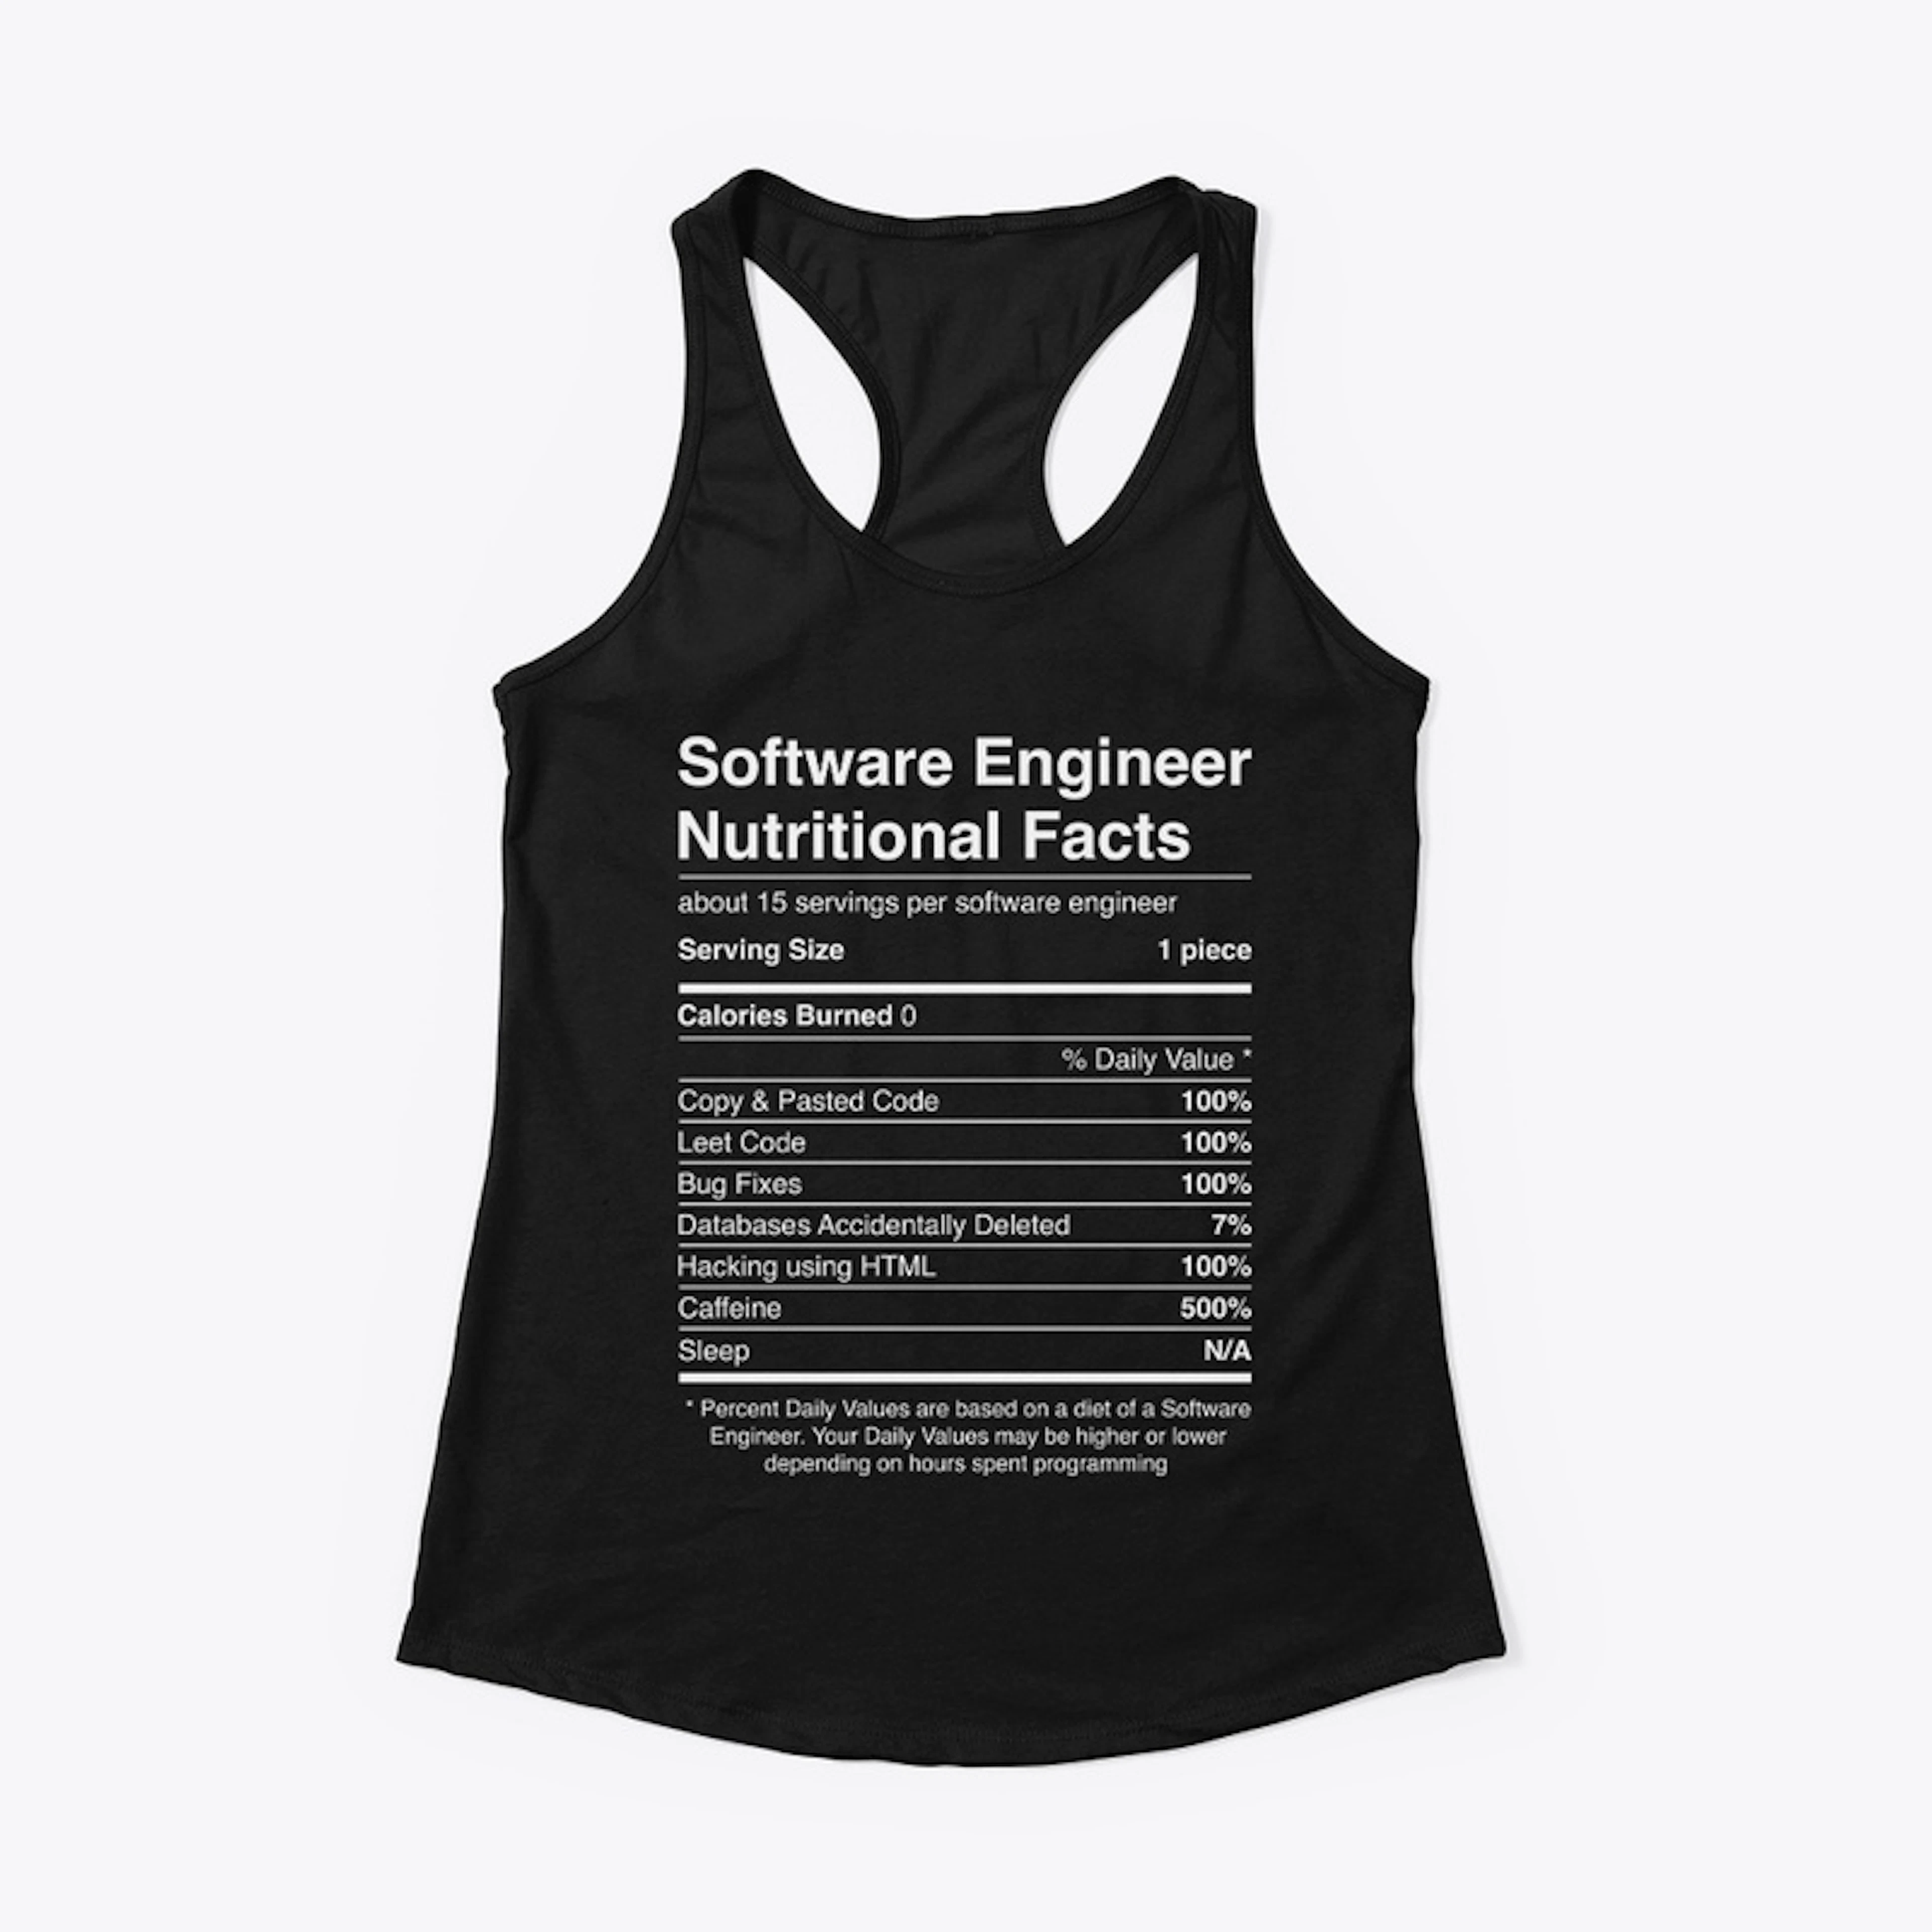 Software Engineer Nutritional Facts